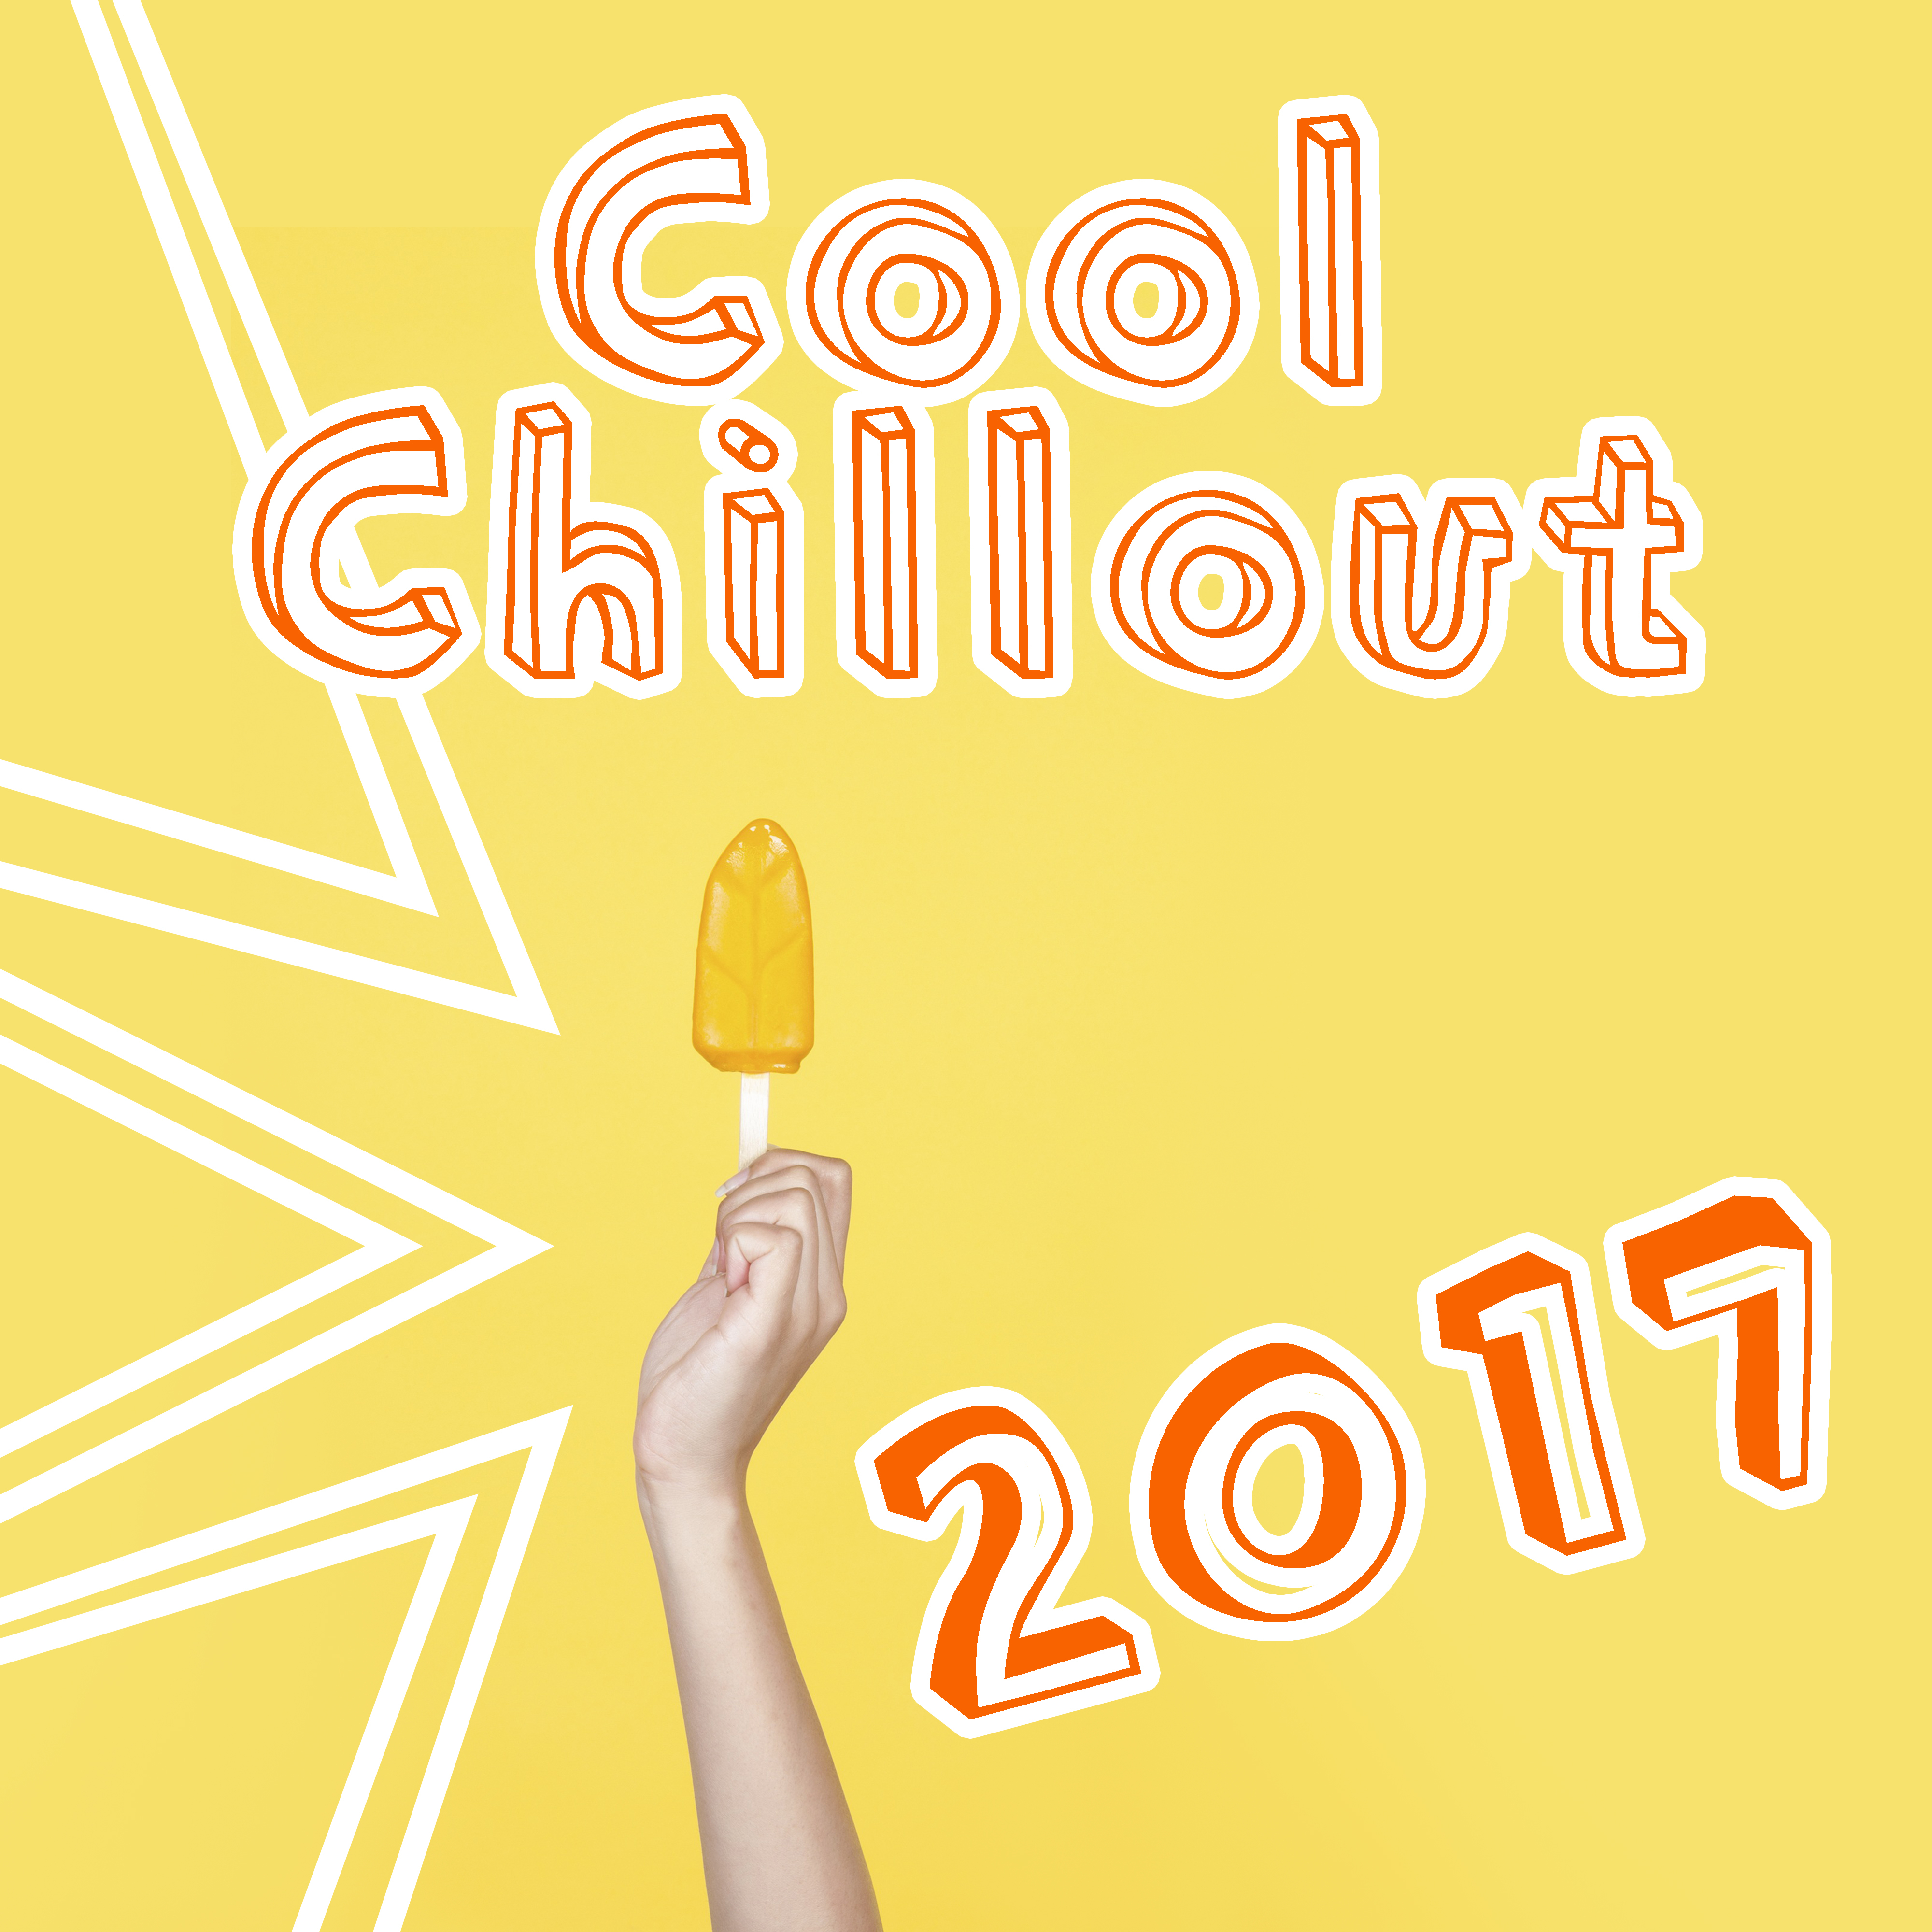 Cool Chillout 2017  Chill Out Music, Relax  Chill, Ibiza, Party Hits 2017, Summertime